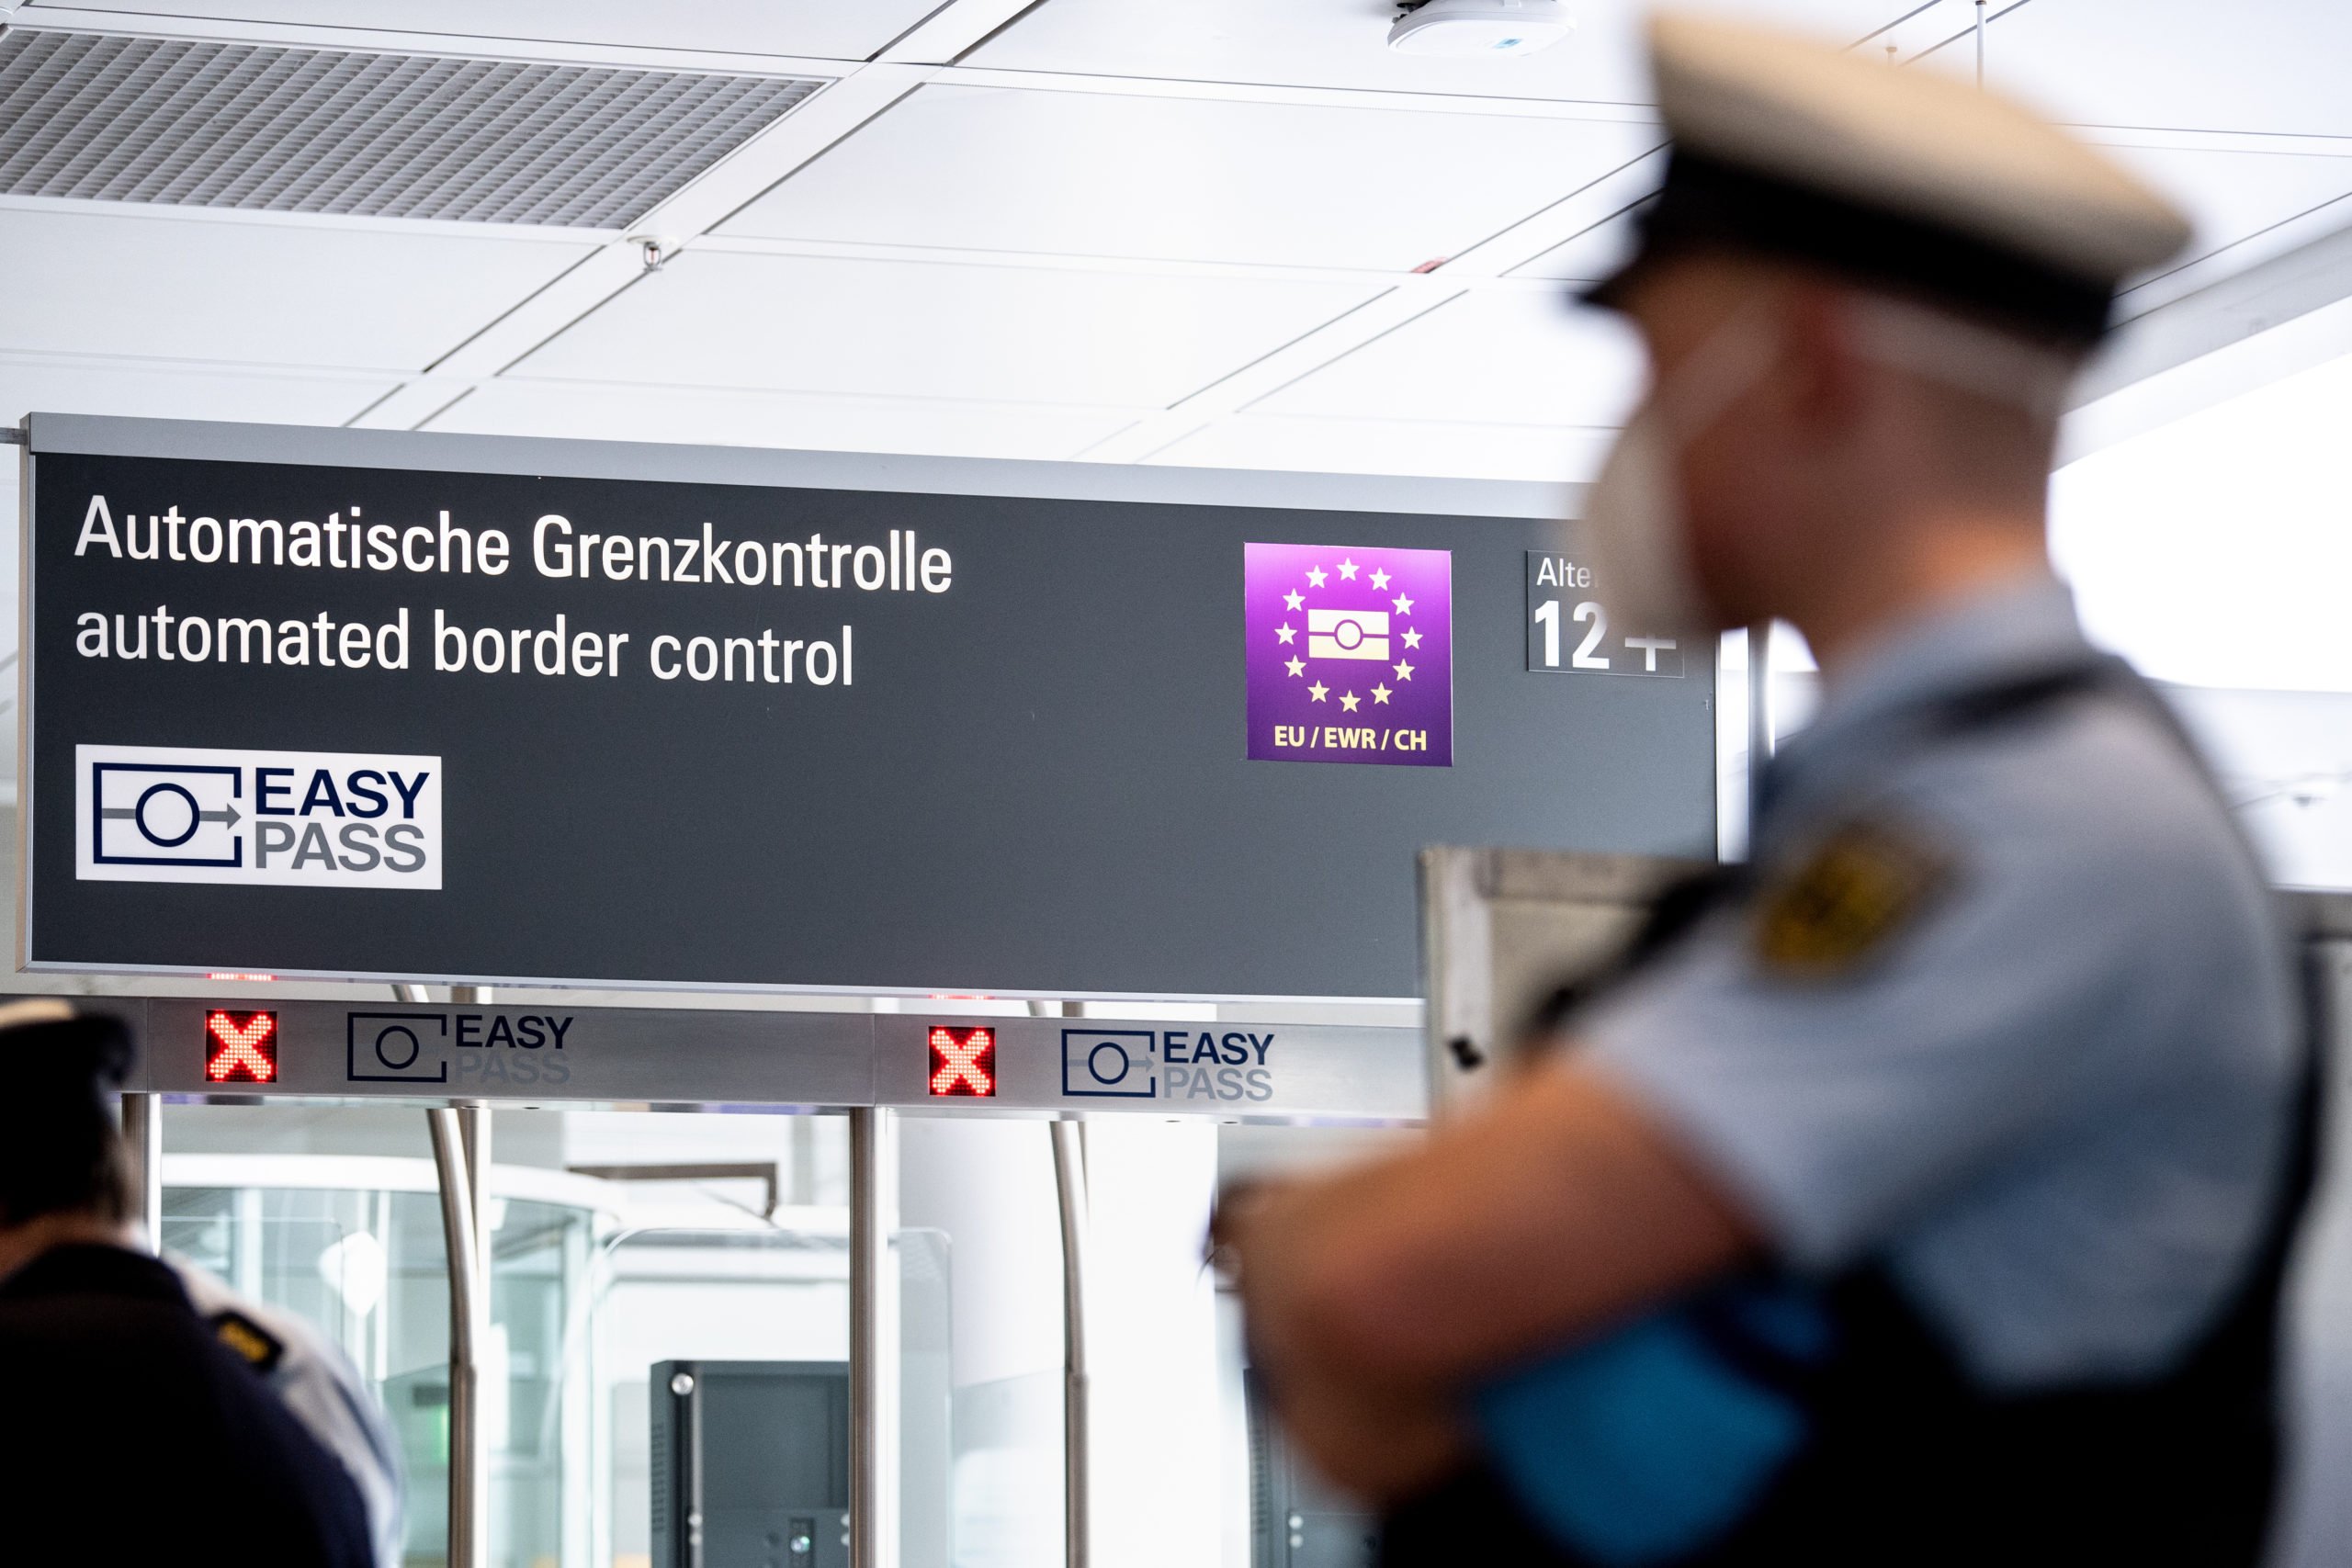 A police officer at border control in Germany